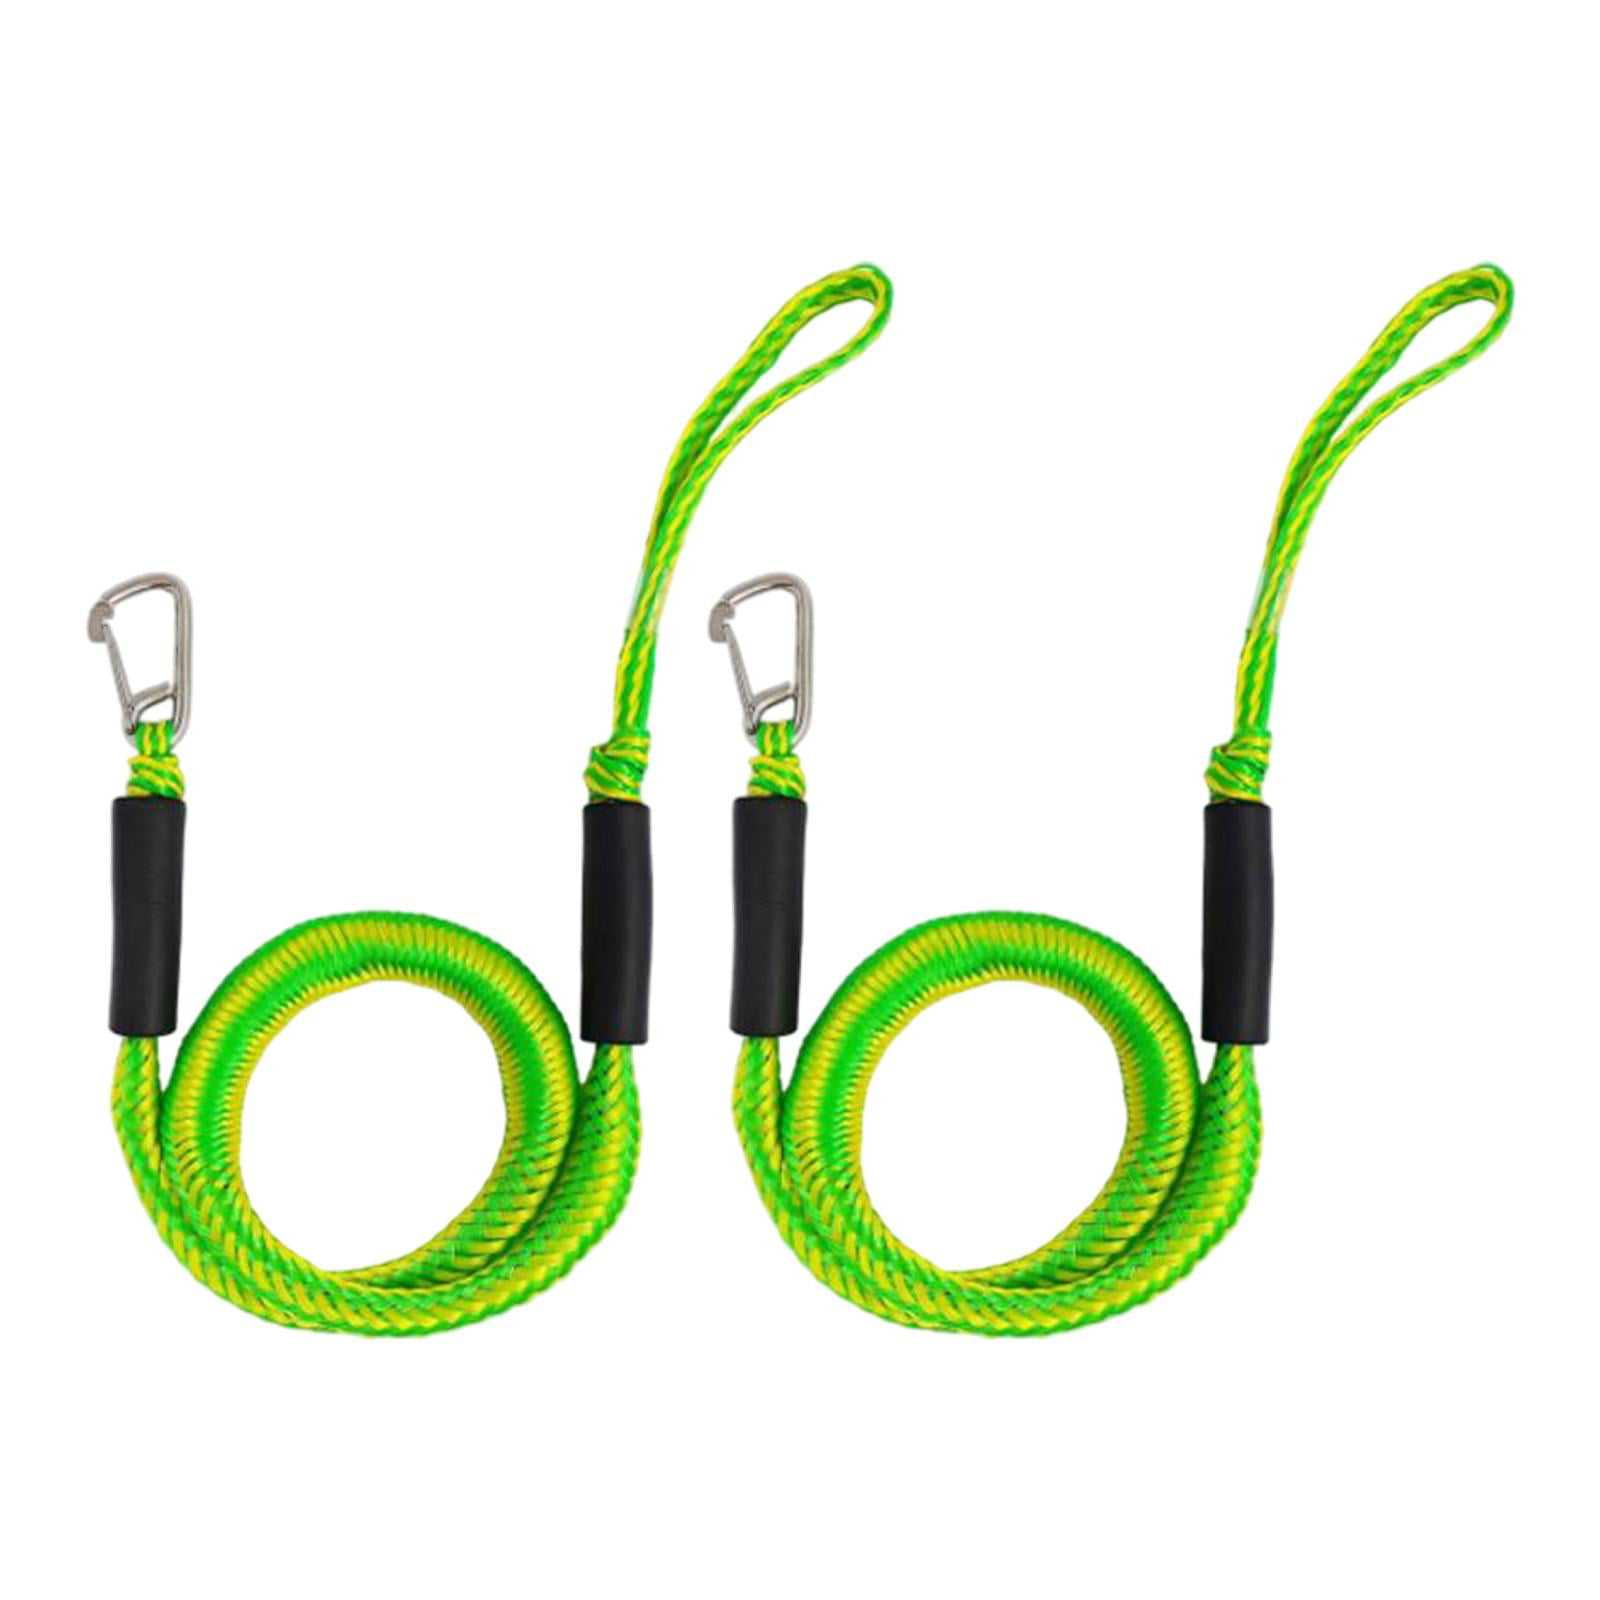 Green Mooring Rope for Boat 6 ft 4 Pack & Green Bungee Dock Line with Hook